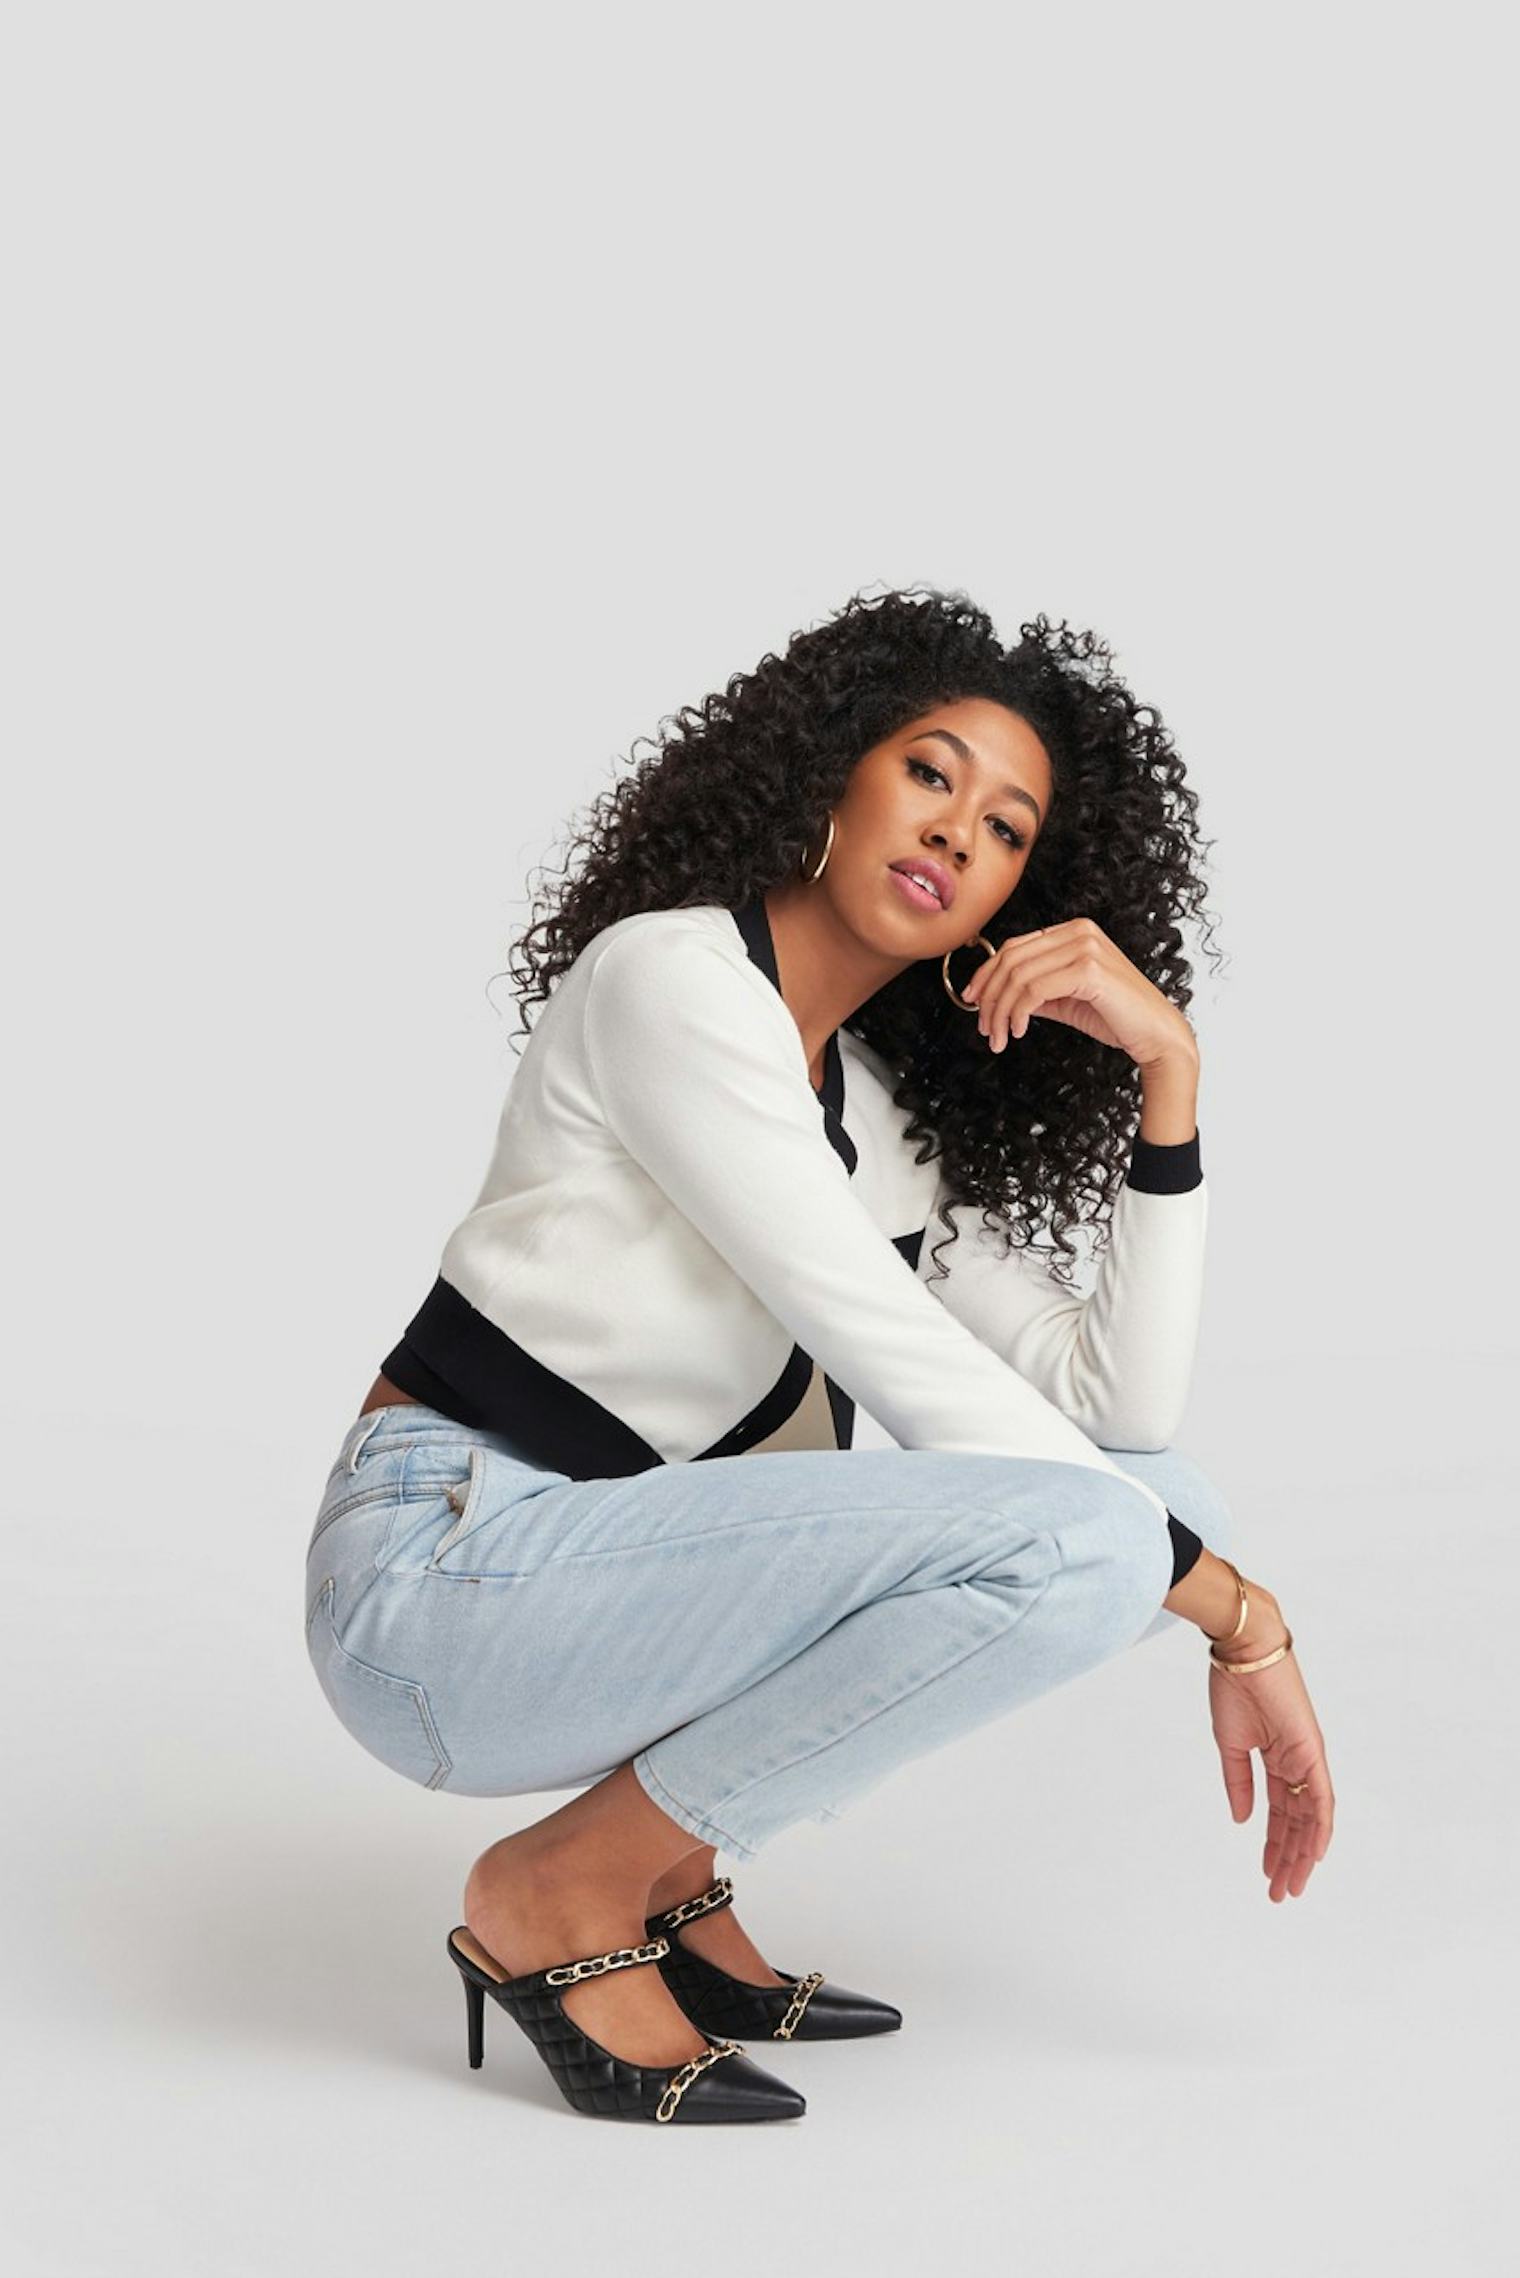 Aoki Lee Simmons On Fashion, Modeling, & Her New Shoe Collaboration